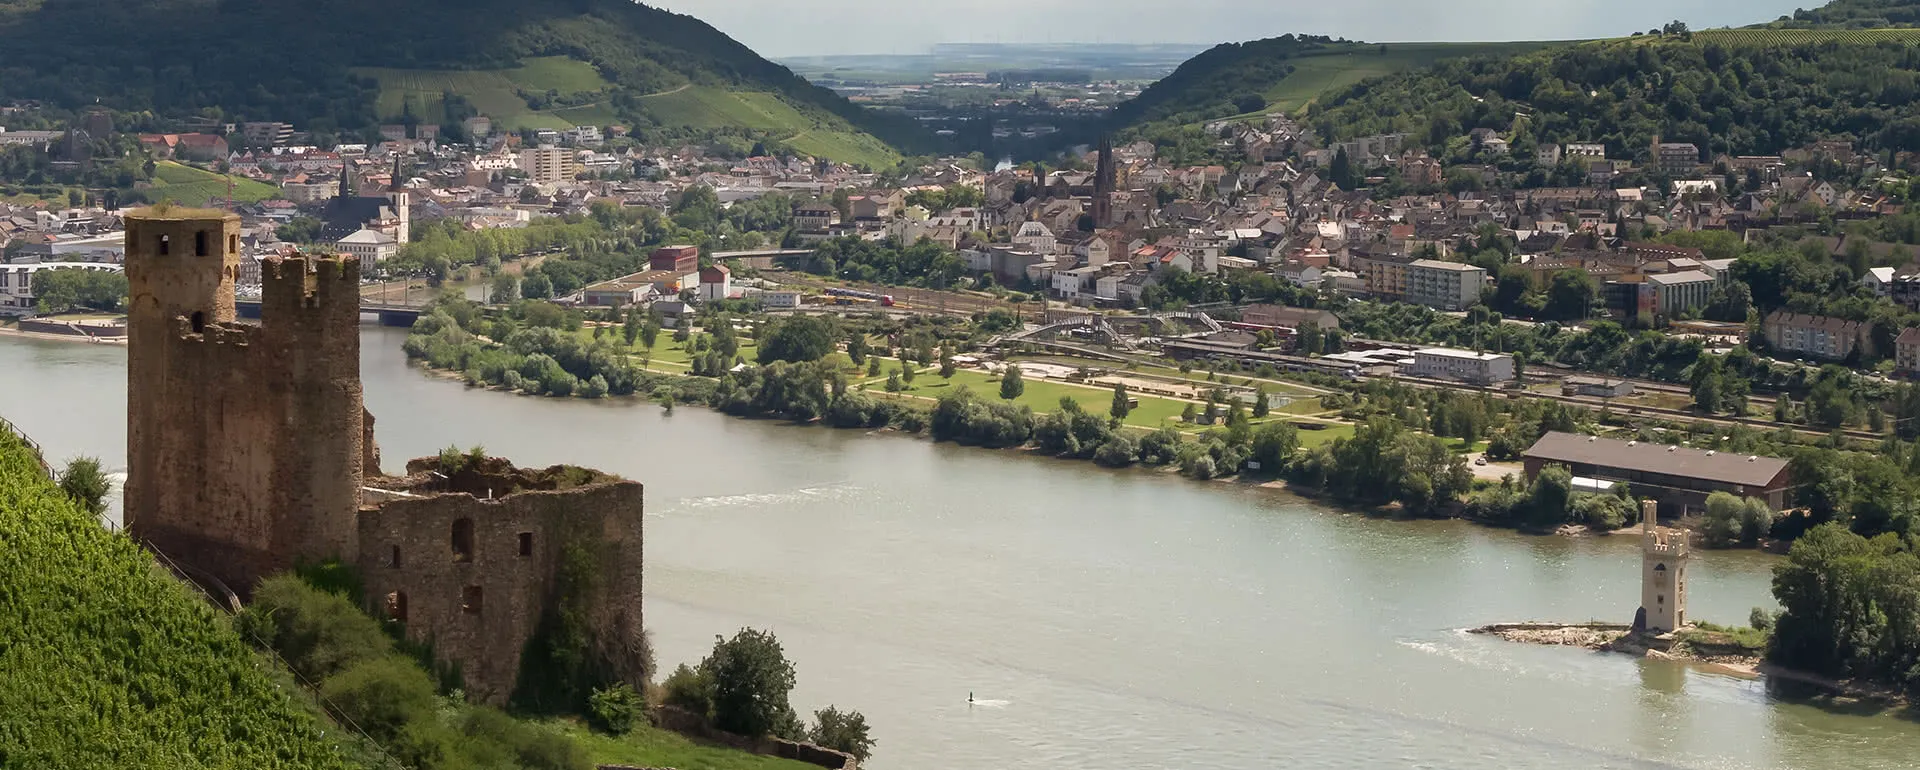 Ruedesheim - the destination with youth hostels